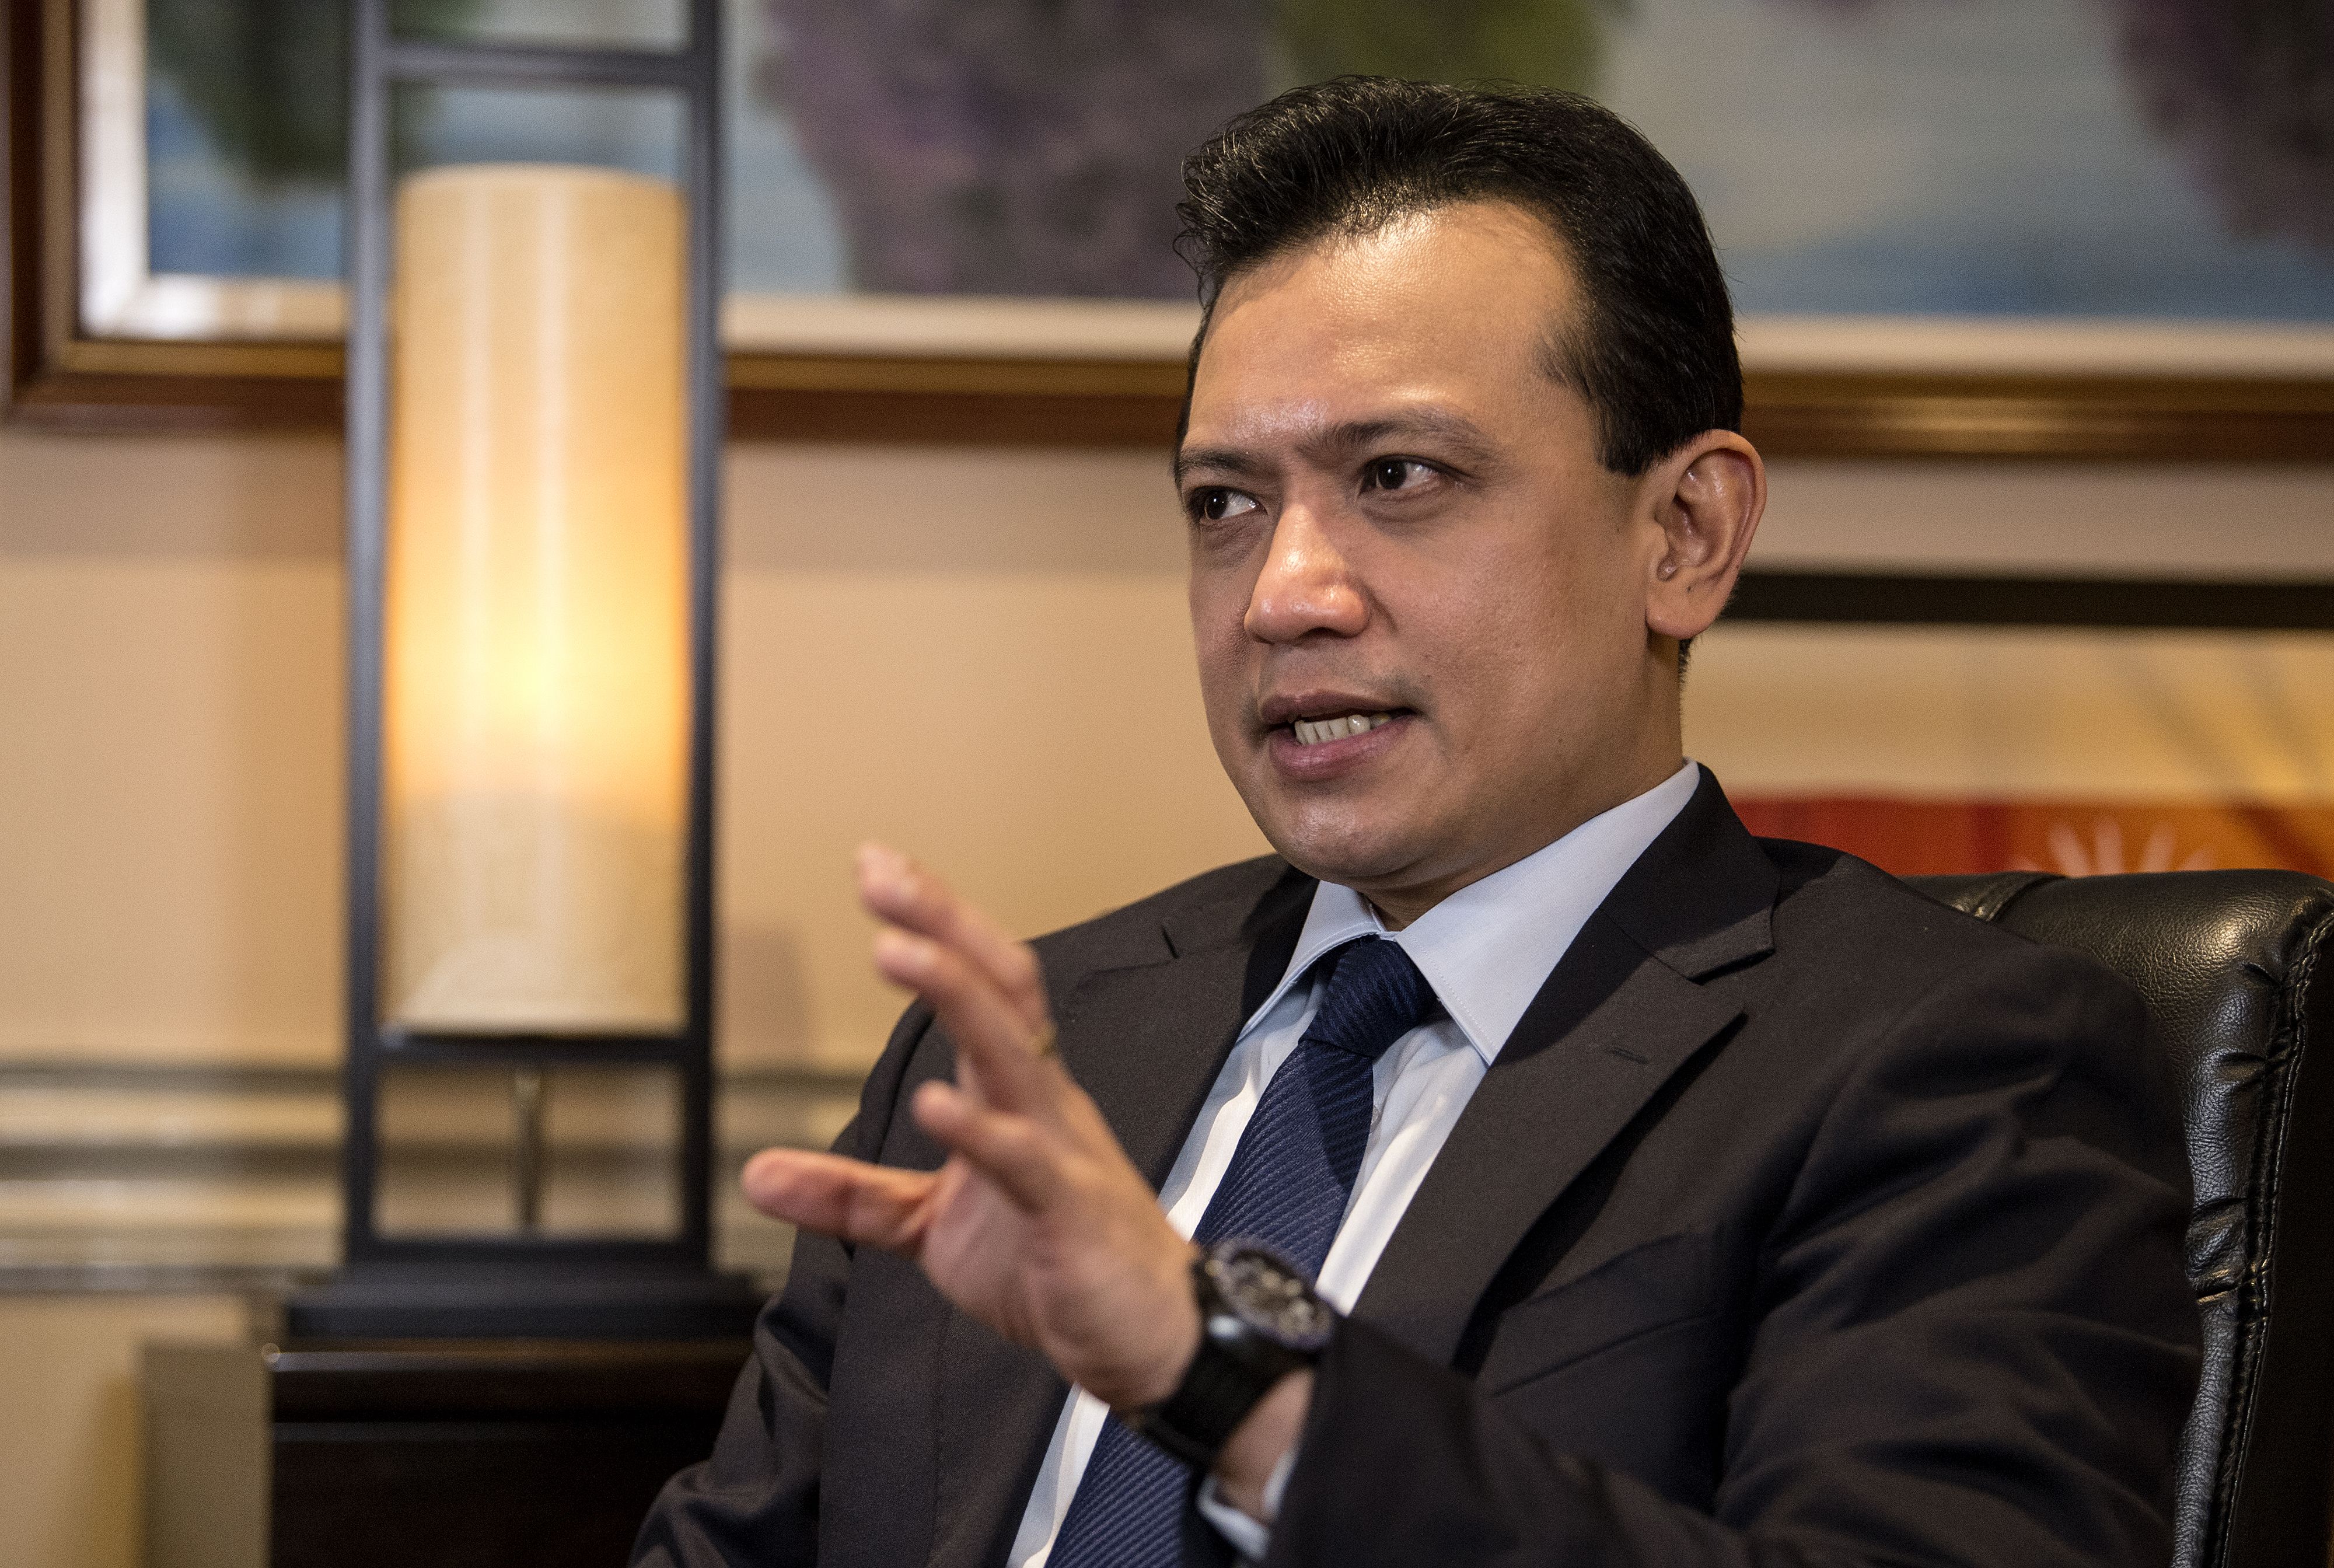 This photo taken on September 13, 2017 shows Philippine Senator Antonio Trillanes gesturing during an interview at his office in the Senate building in Manila. (Noel Celis—AFP/Getty Images)